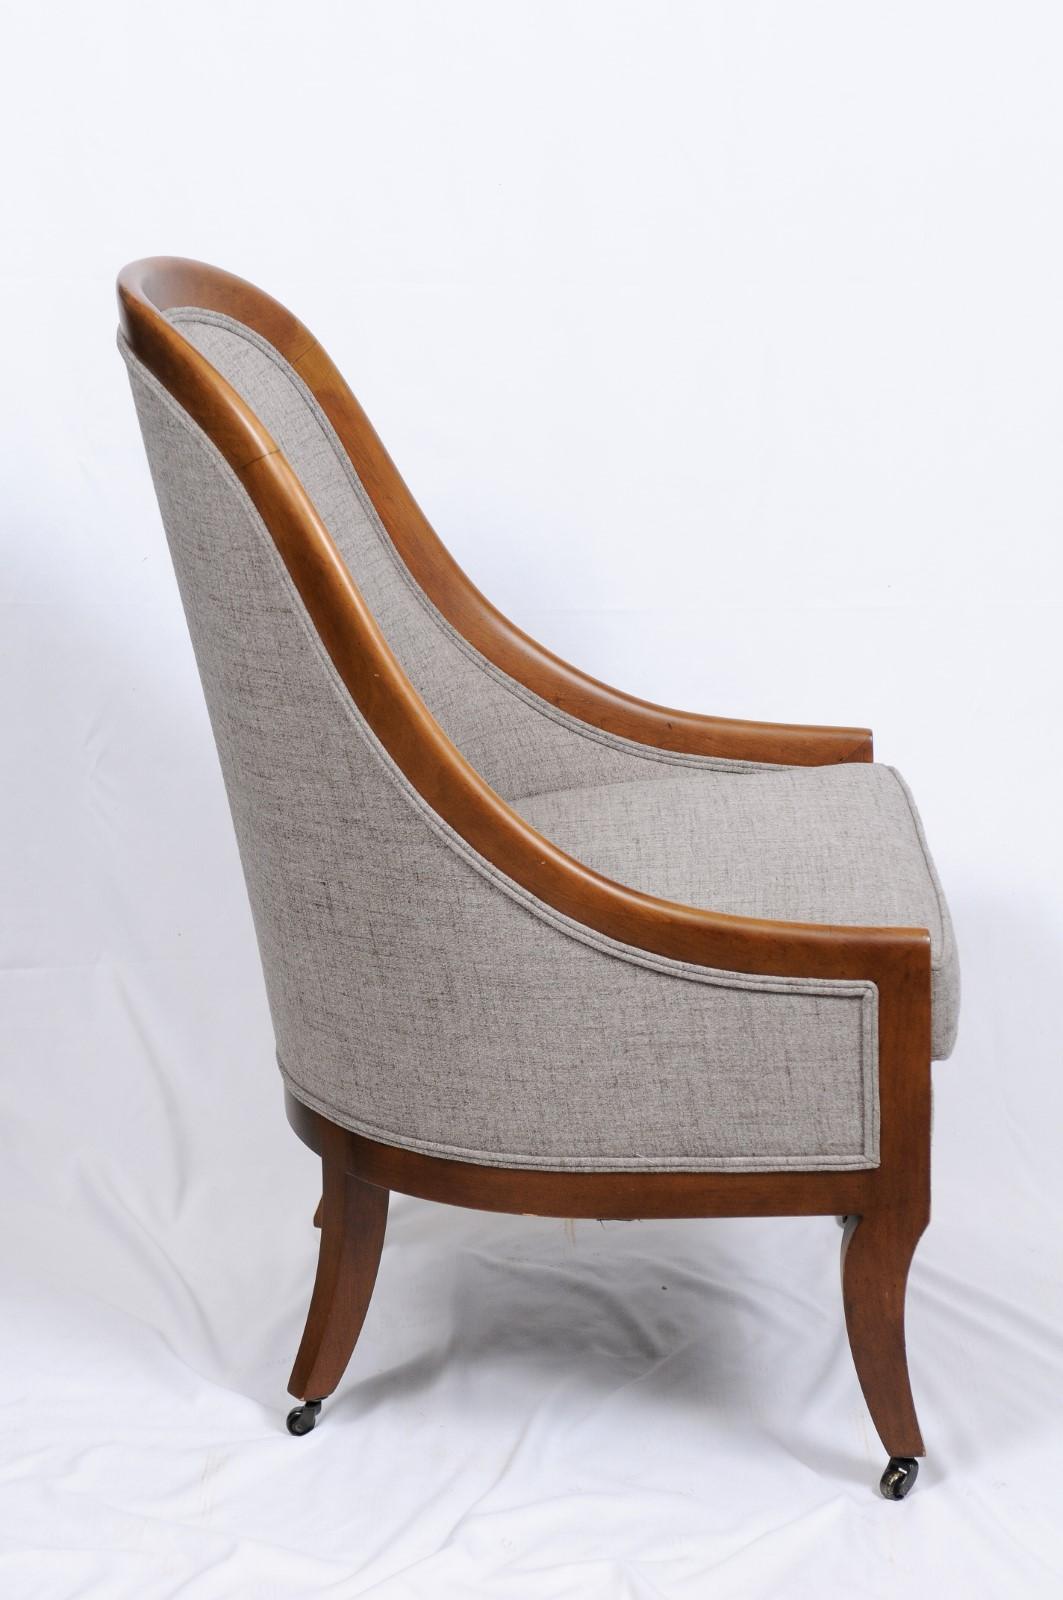 20th Century Walnut Bergère Chairs by Baker Furniture, 2 Available